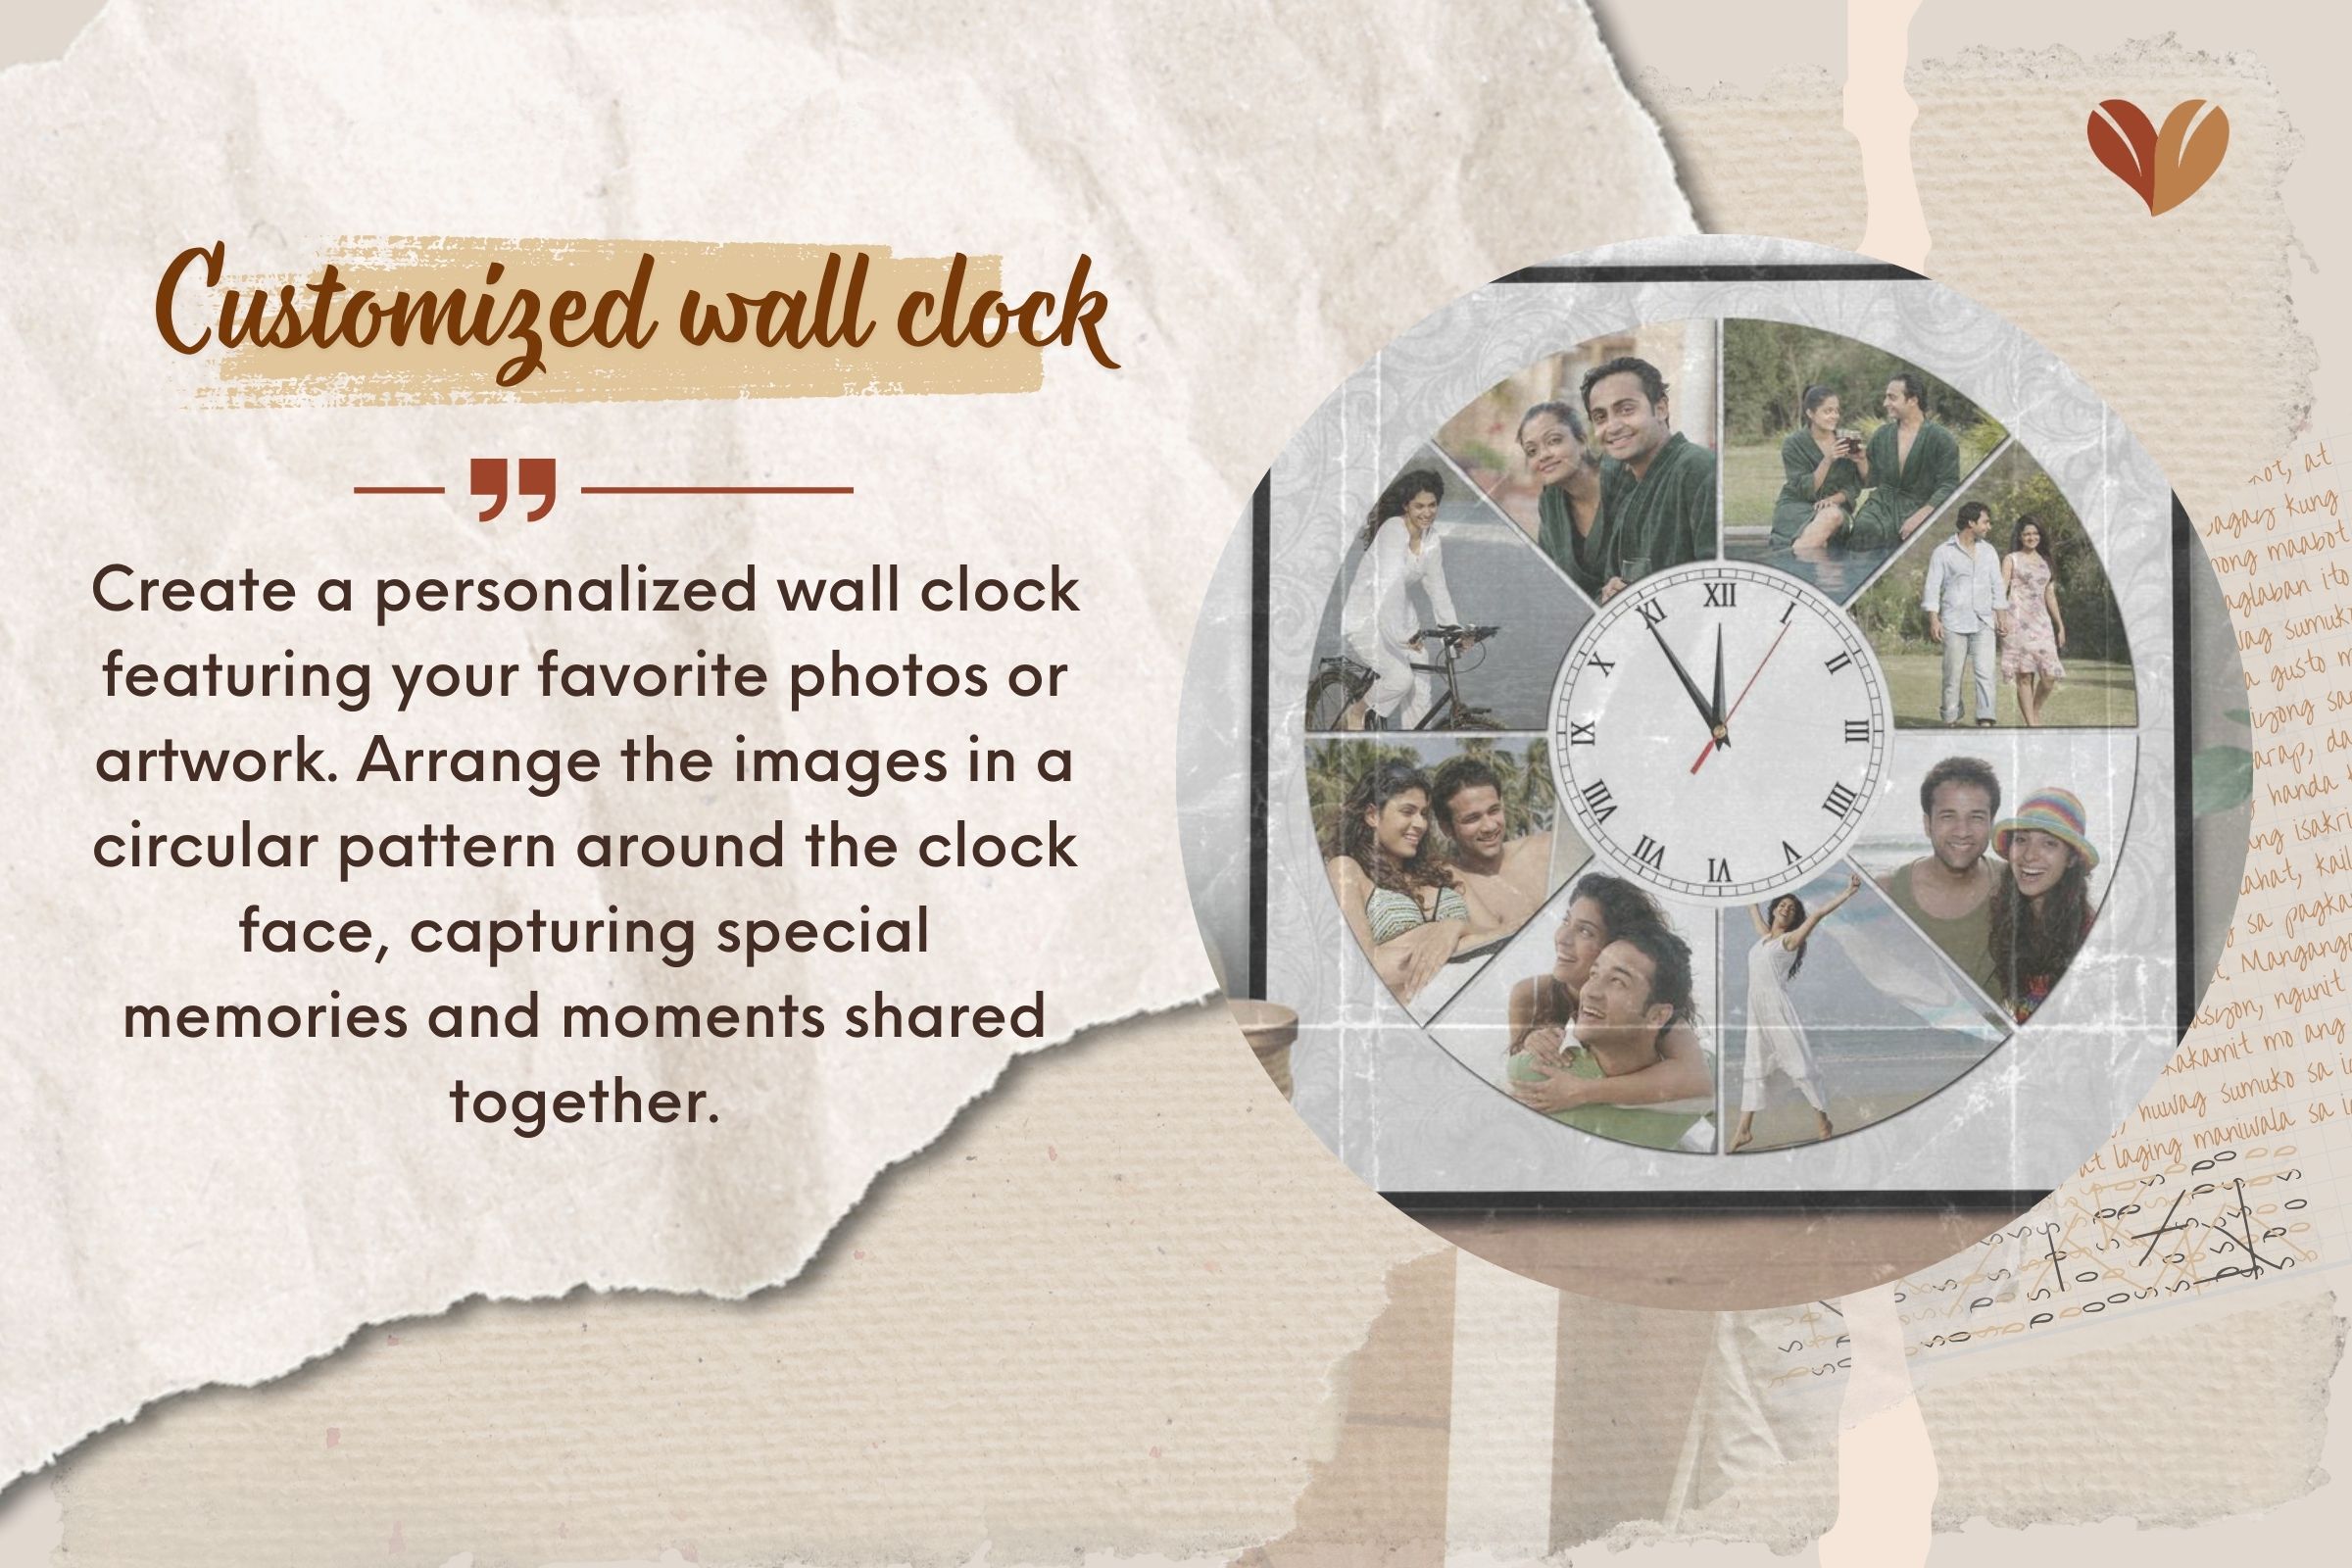 Customized wall clock for wife on 1st wedding anniversary